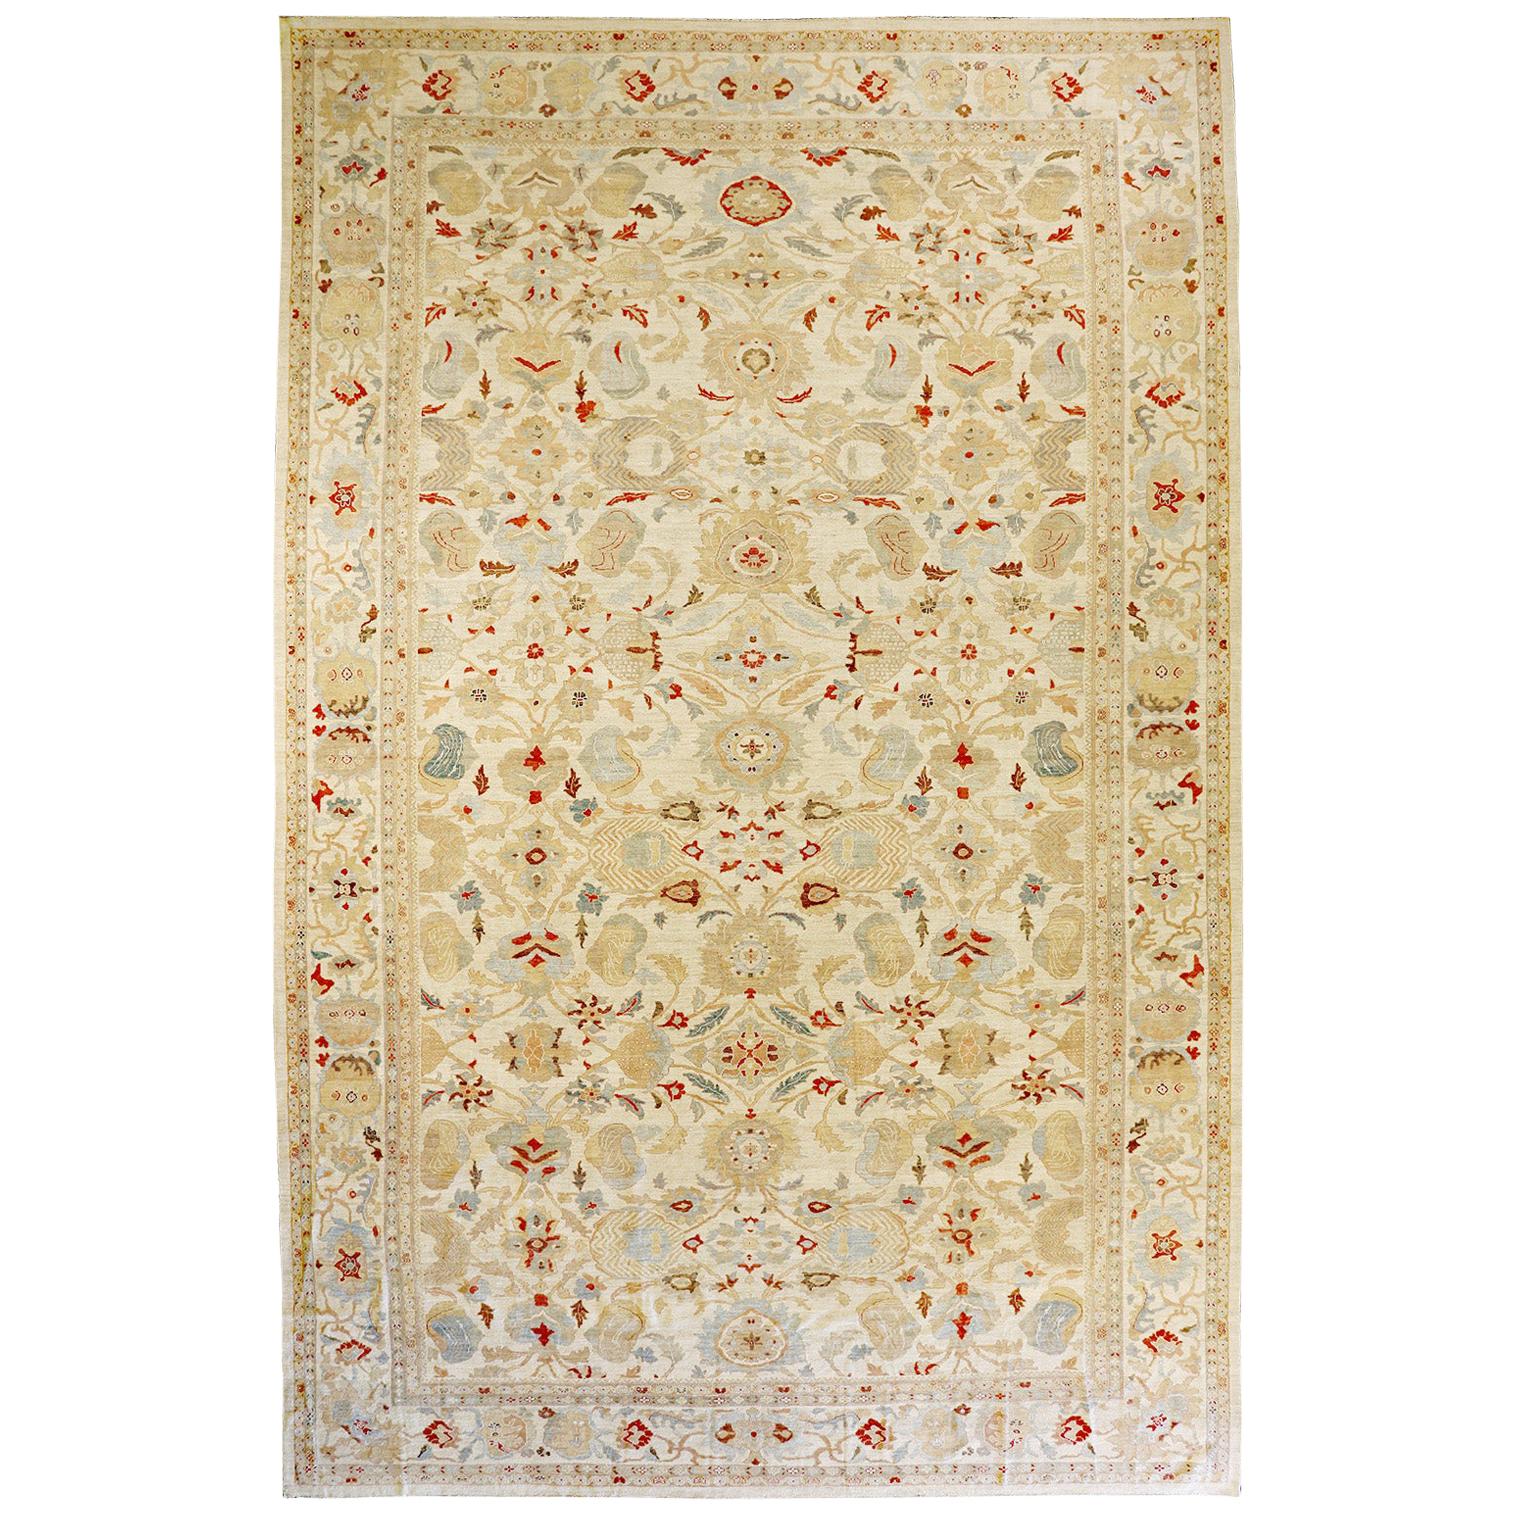 Oversize Persian Sultanabad Rug with Beige and Red Botanical Details